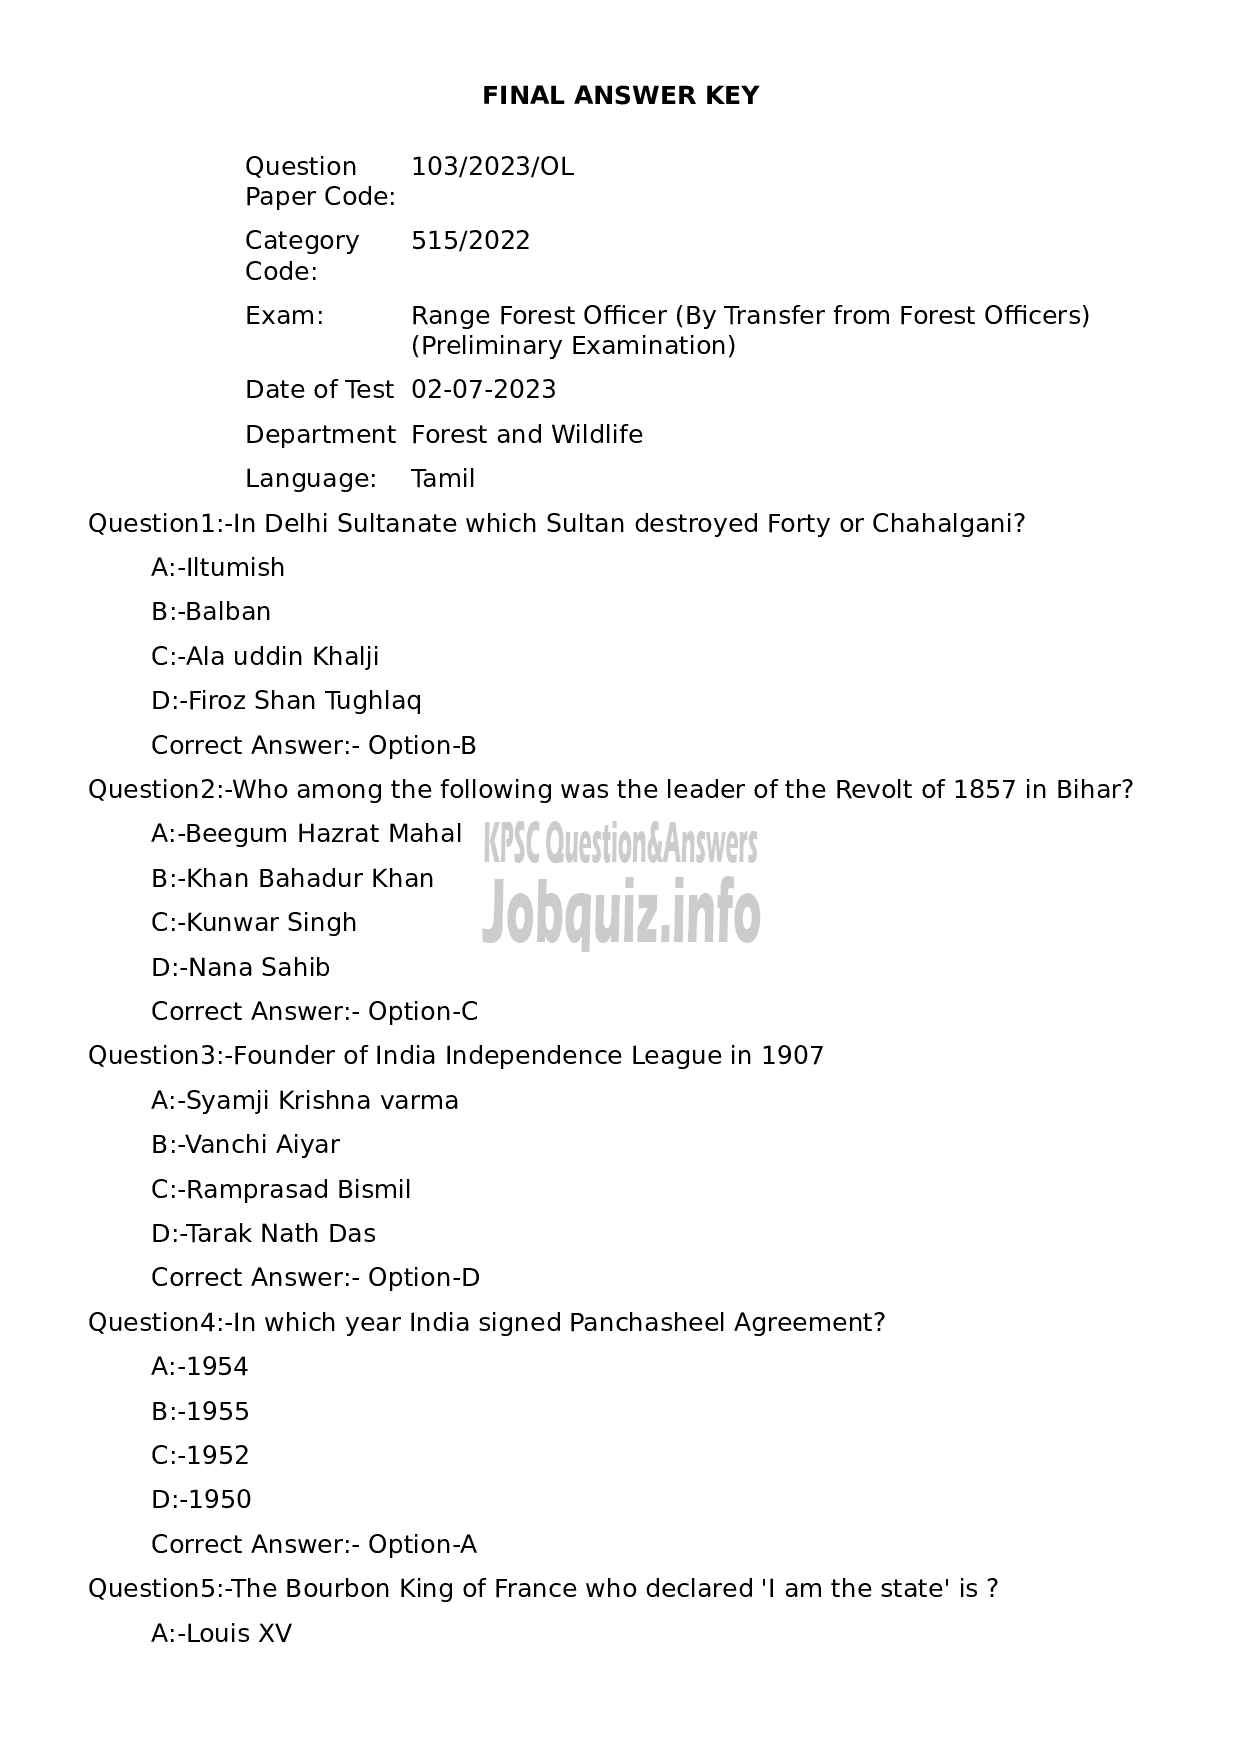 Kerala PSC Question Paper - Range Forest Officer (By Transfer from Forest Officers) (Preliminary Examination)-1